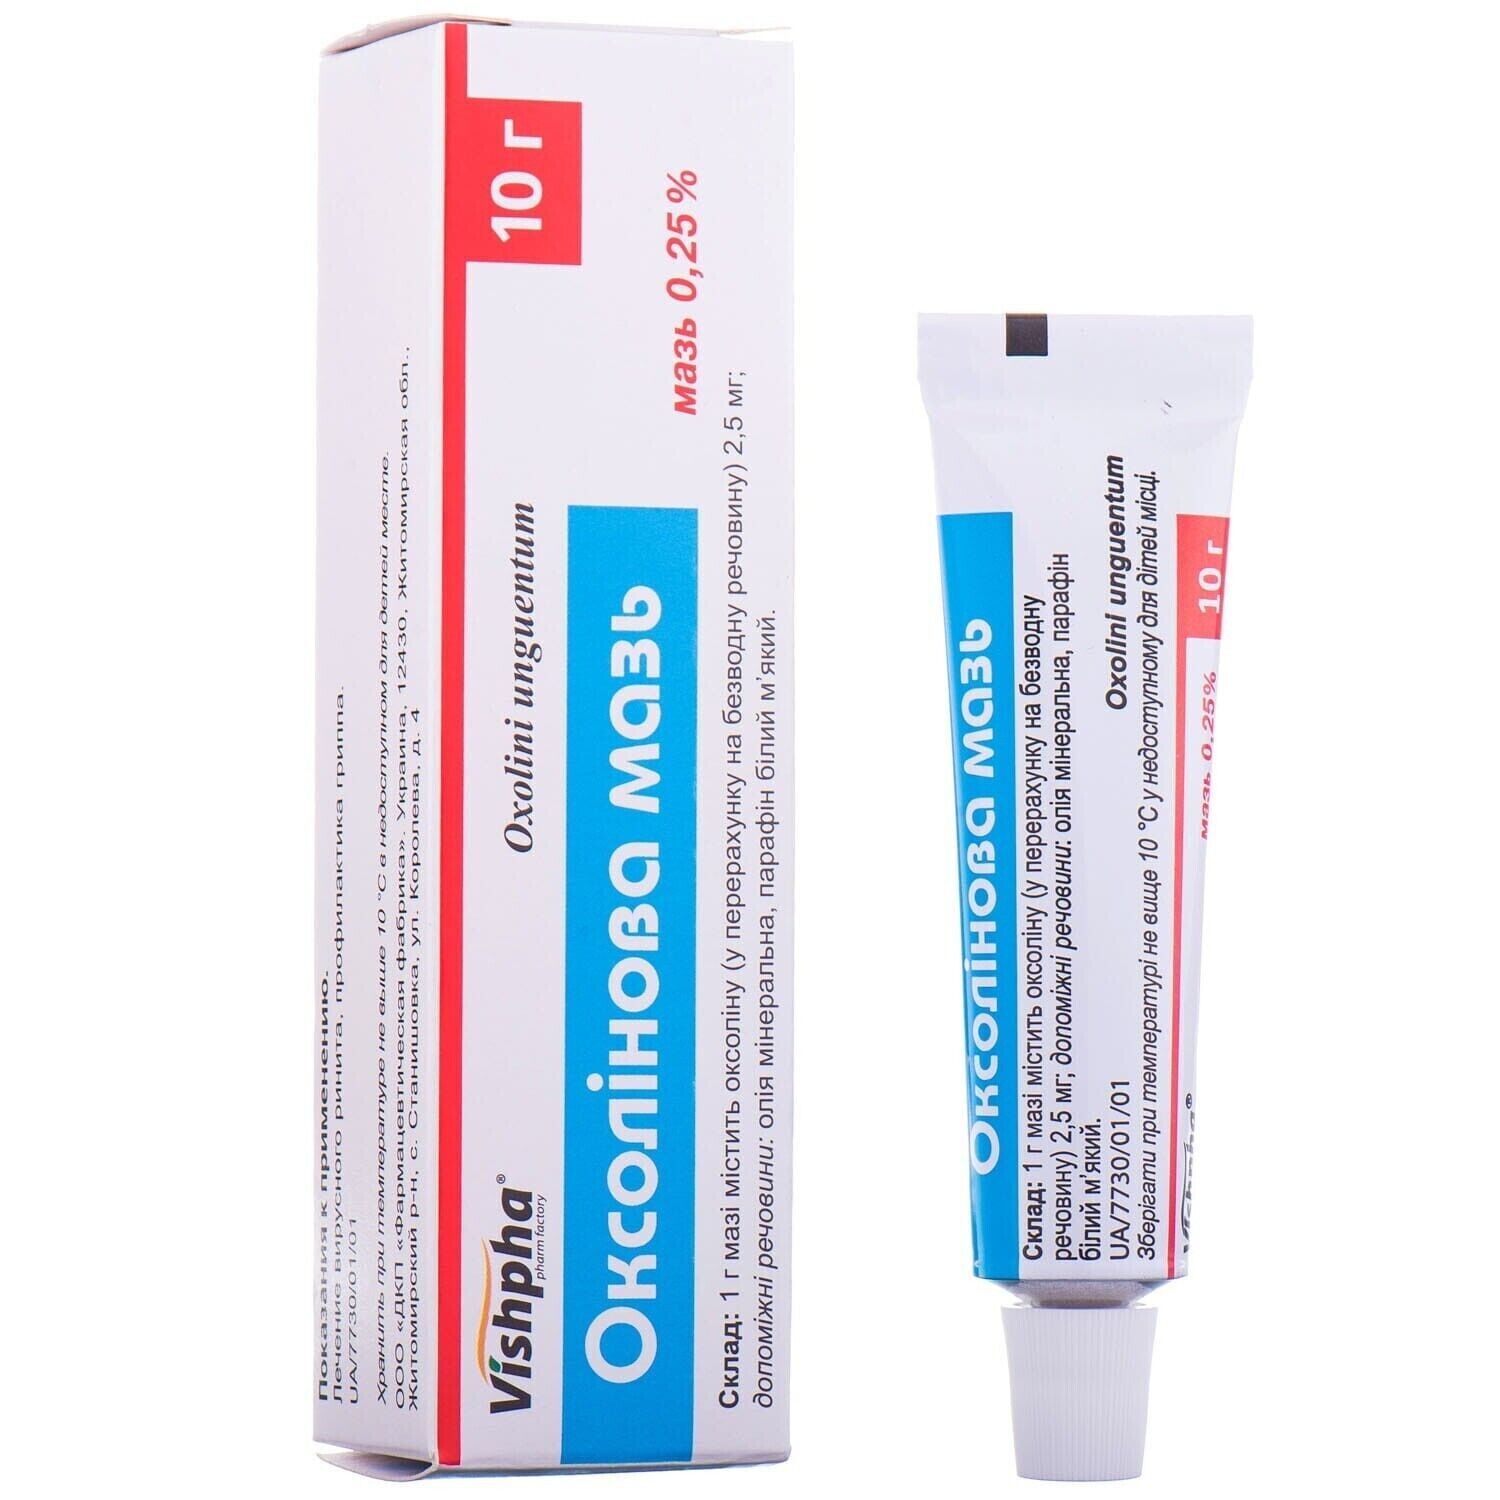 OXOLIN Ointment 0.25%, OKSOLIN Protects against virus 10g Product of Ukraine